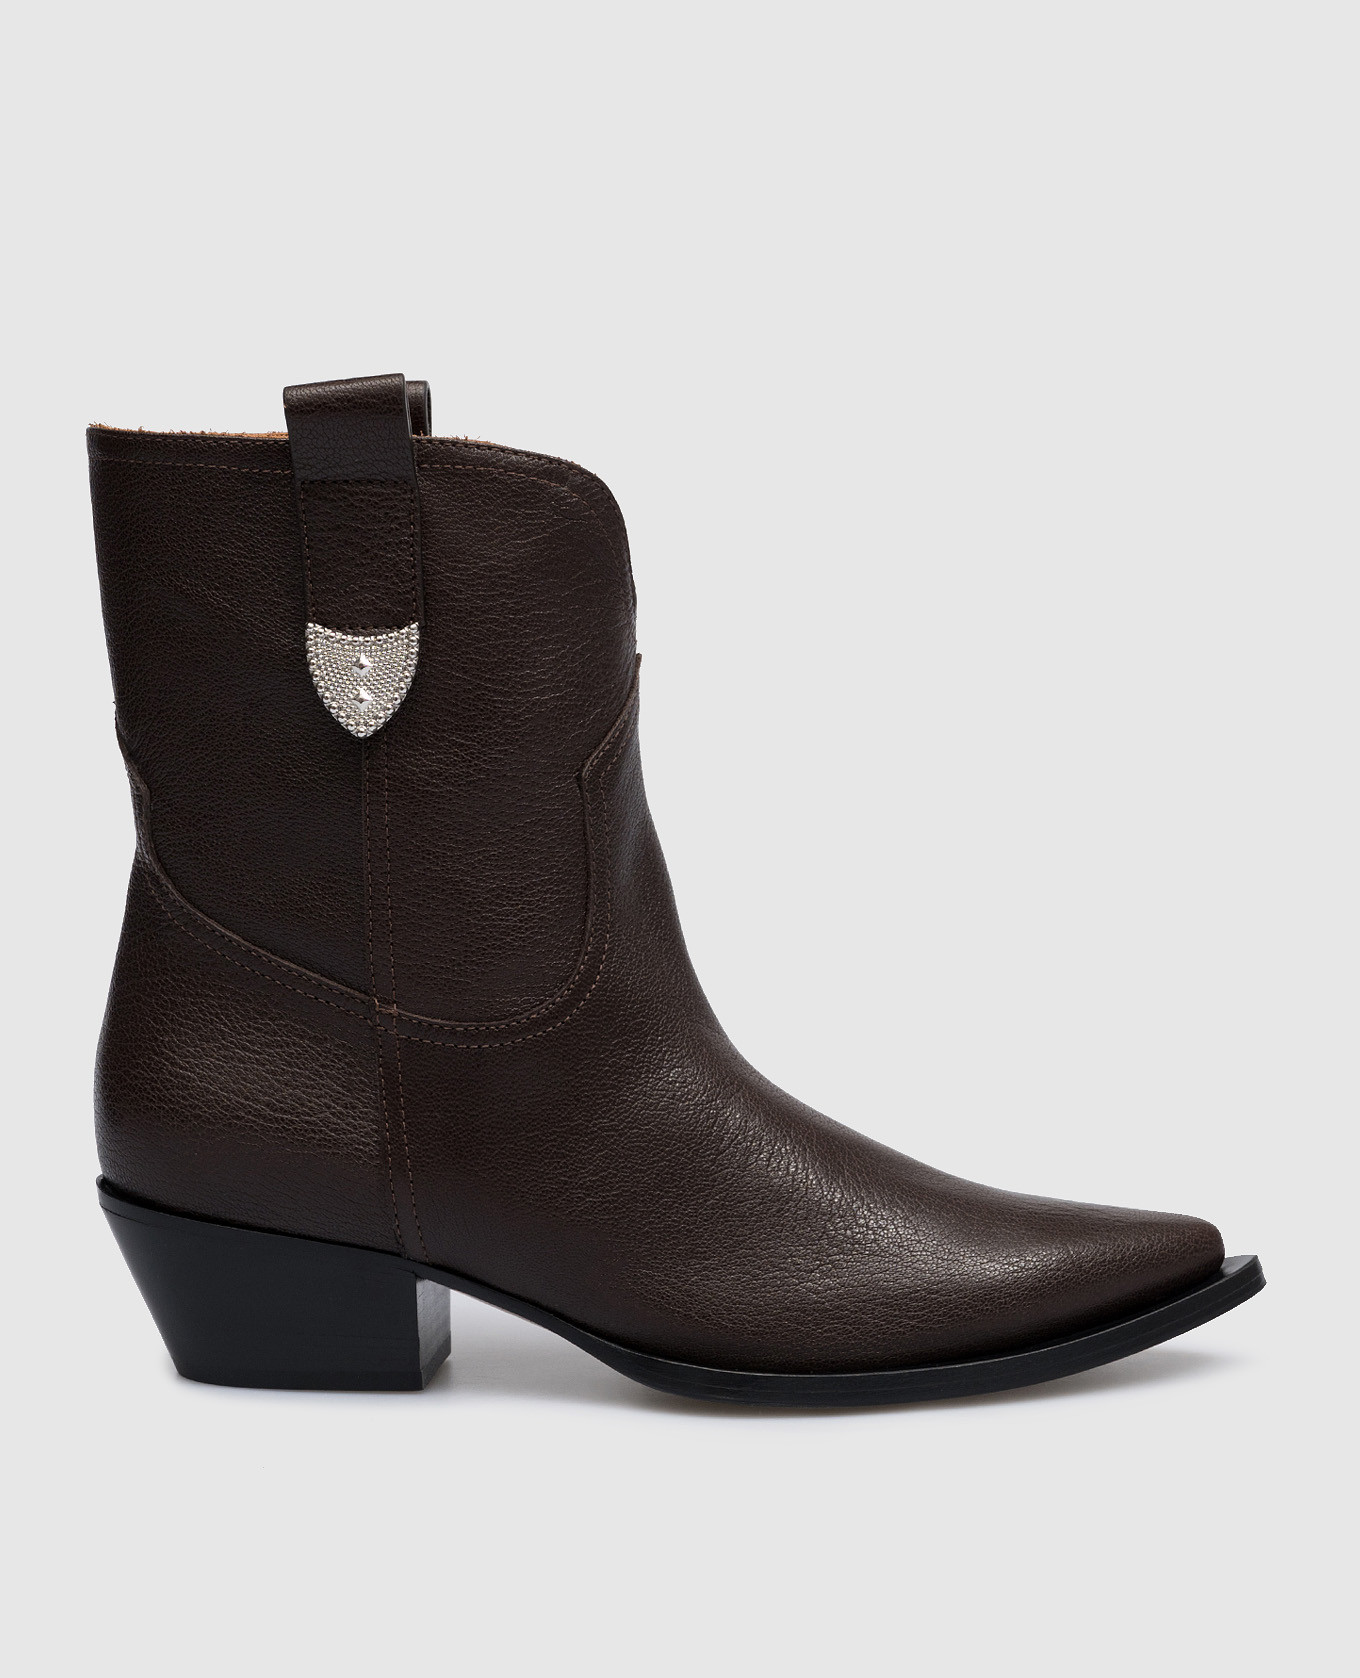 Paris brown leather boots with metal details